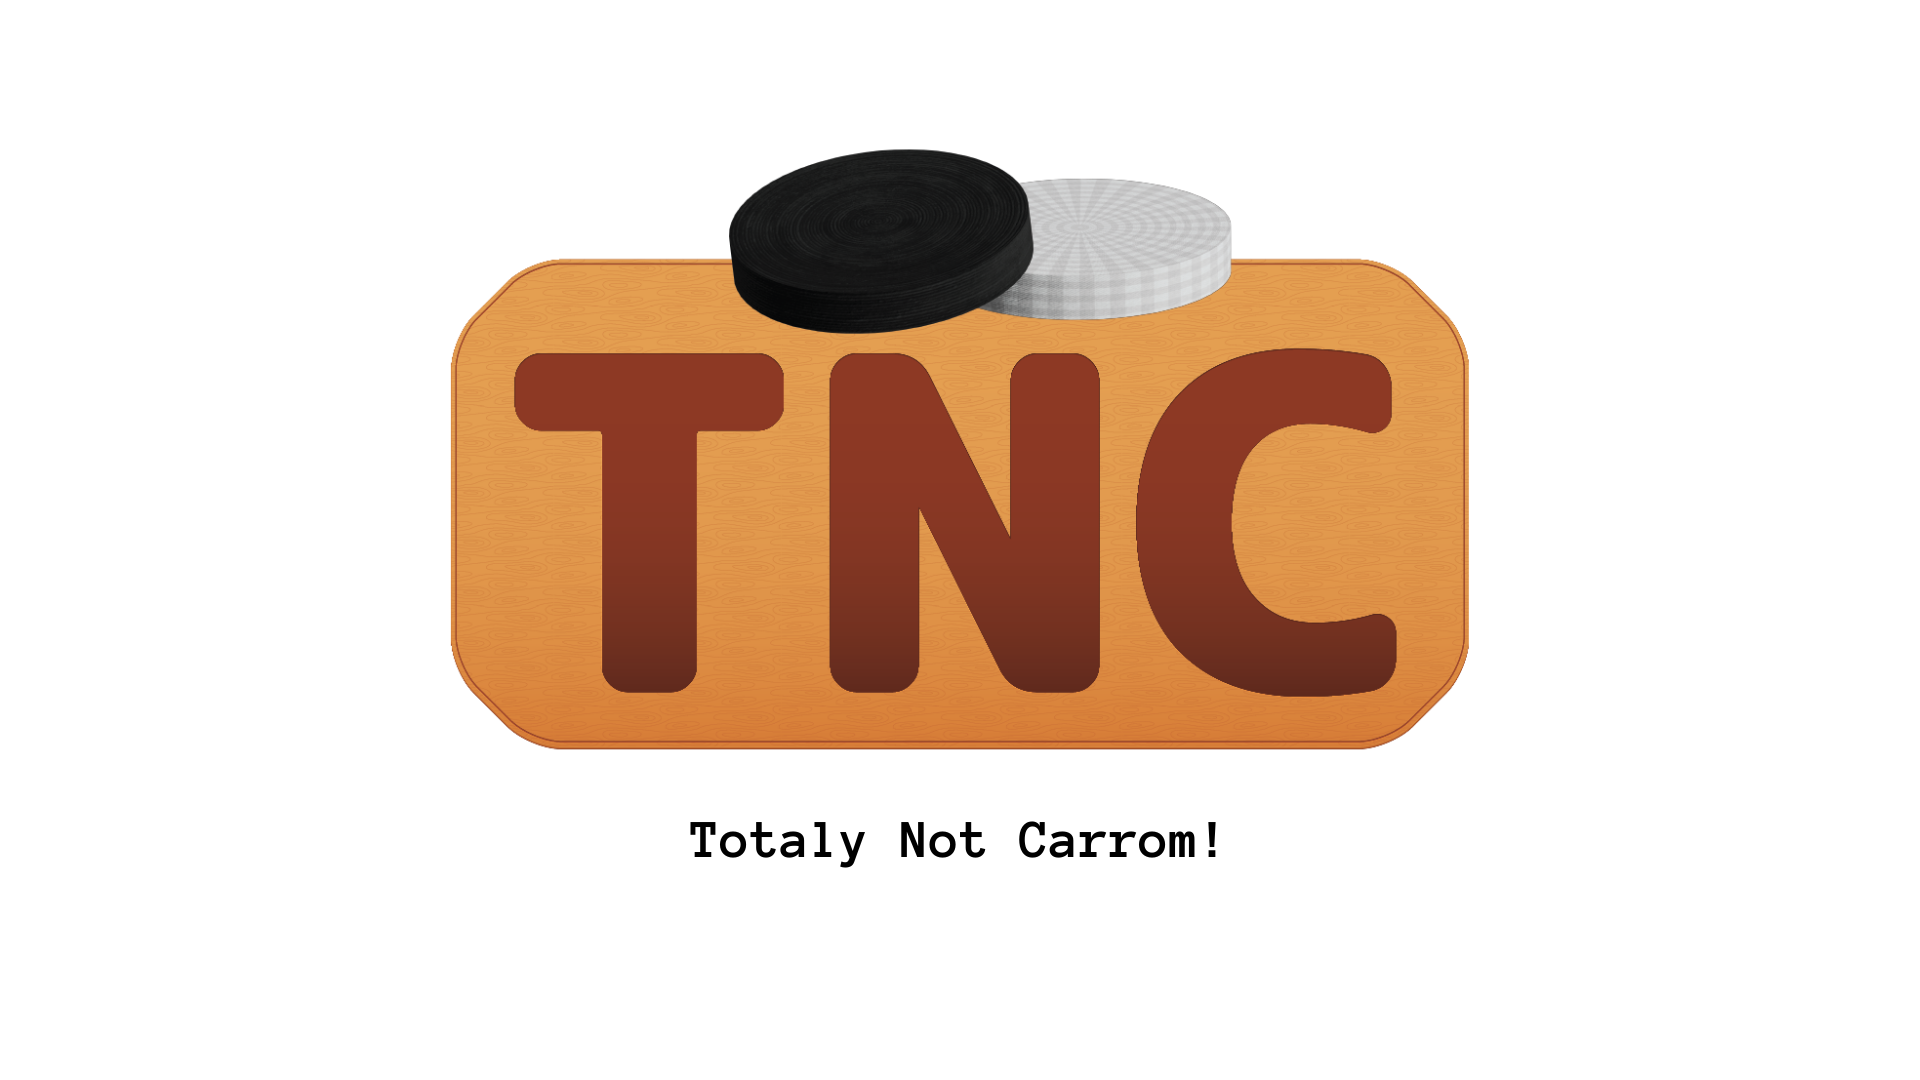 TNC (Totaly Not Carrom!)